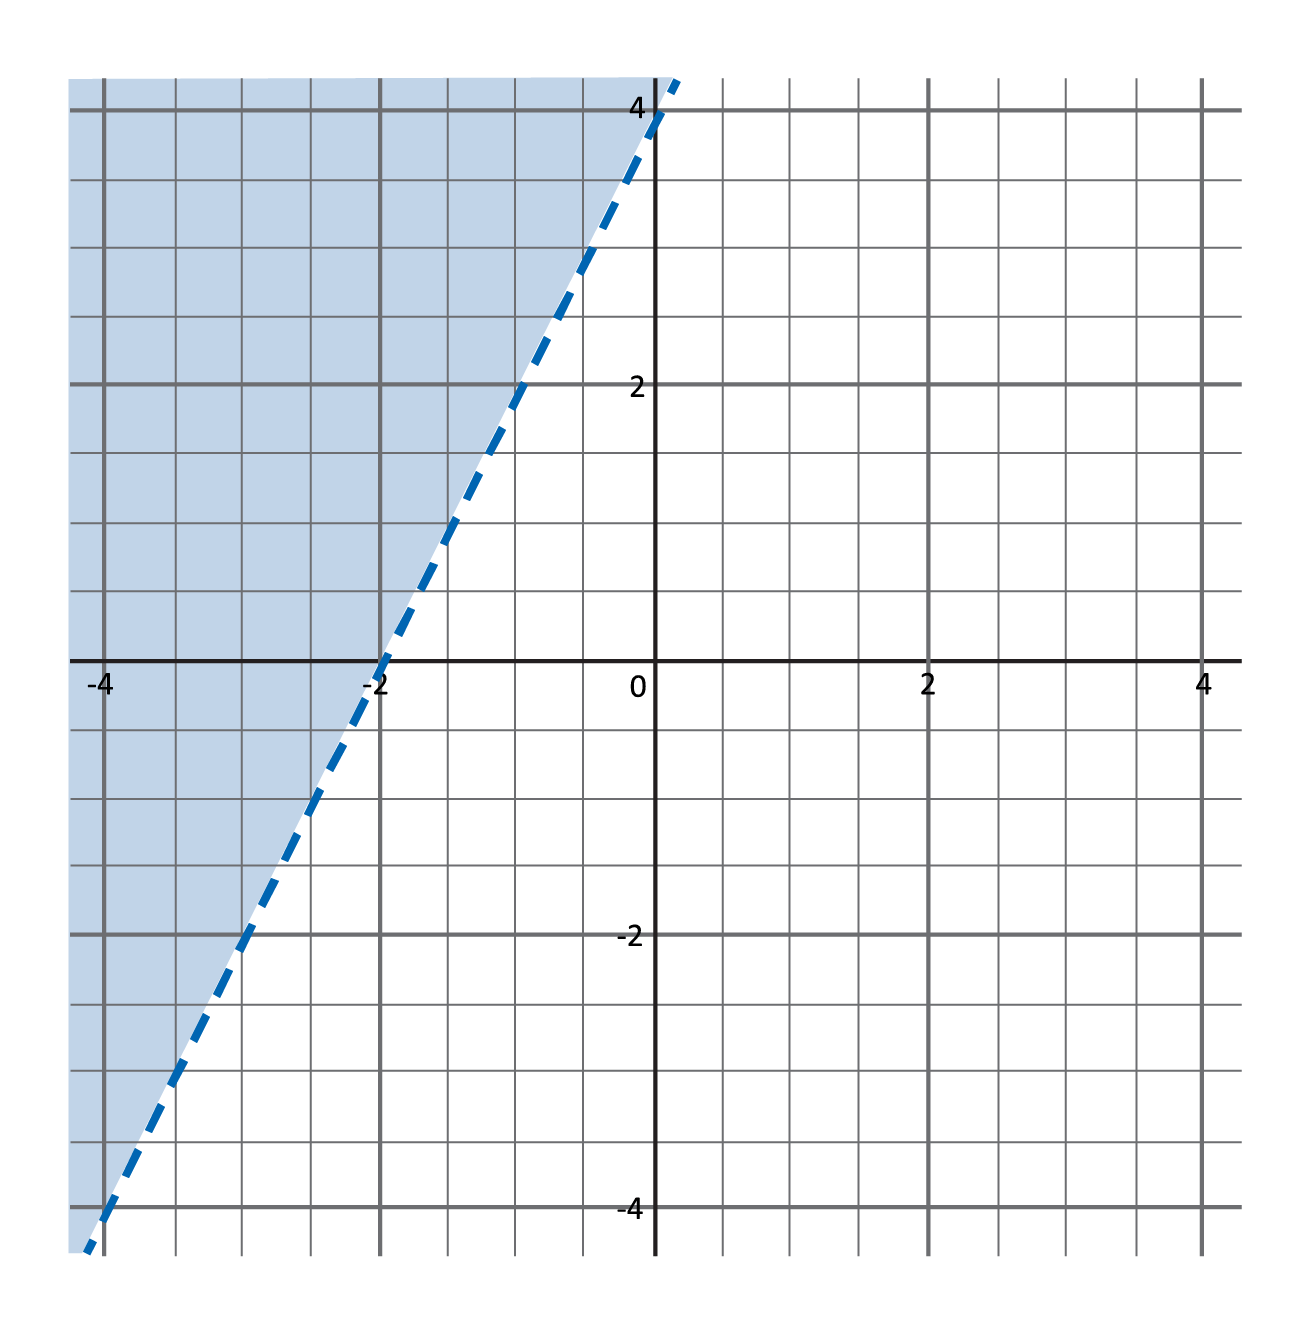 dashed blue line passing through the points (-4, -4) and (0, 4), above line is shaded blue